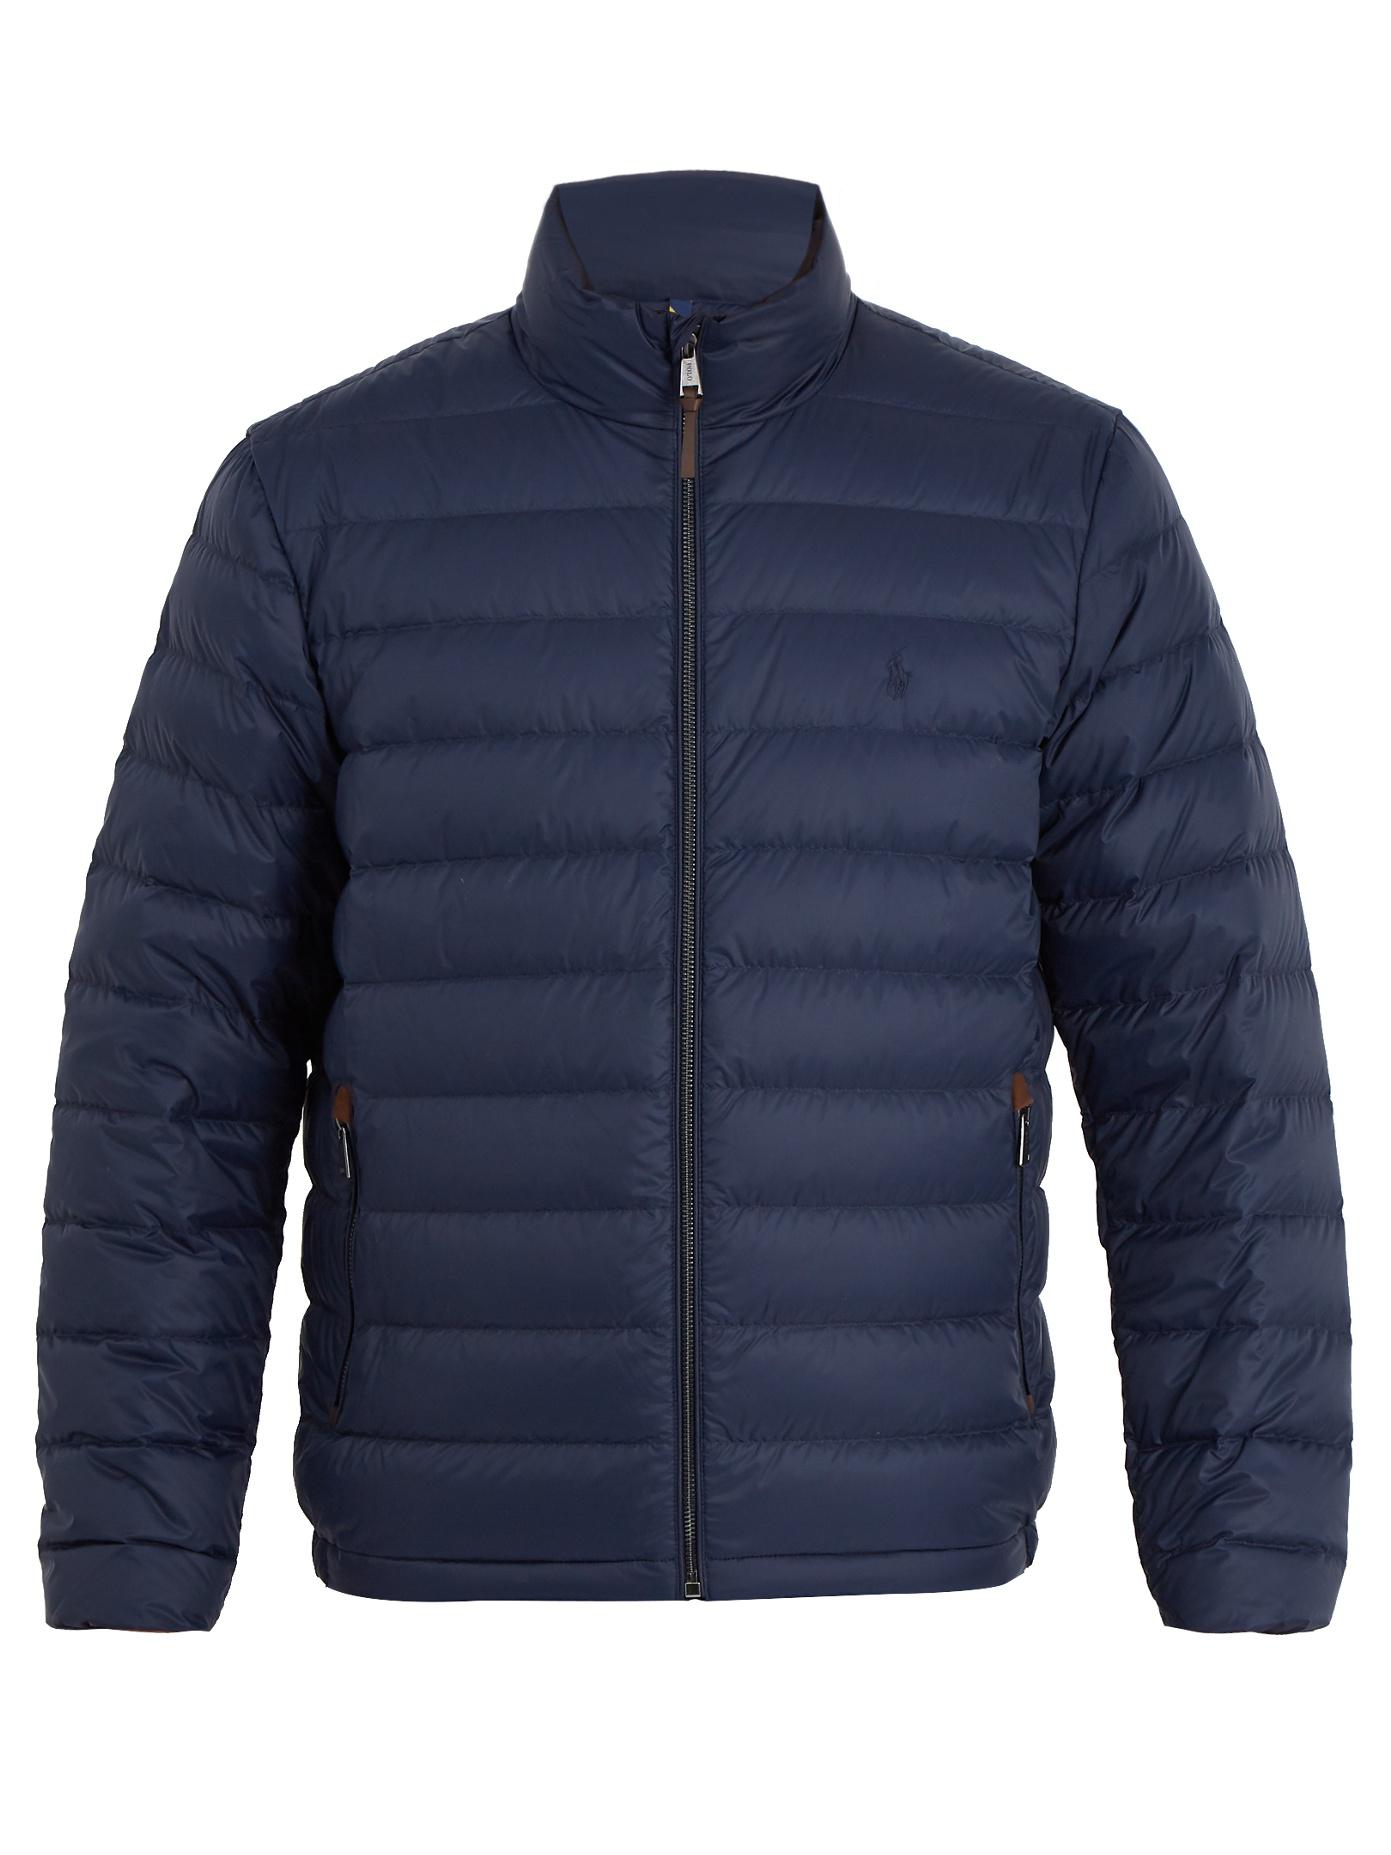 Petite ralph lauren quilted down jacket fashion, North face jacket with hood, givenchy v neck t shirt. 